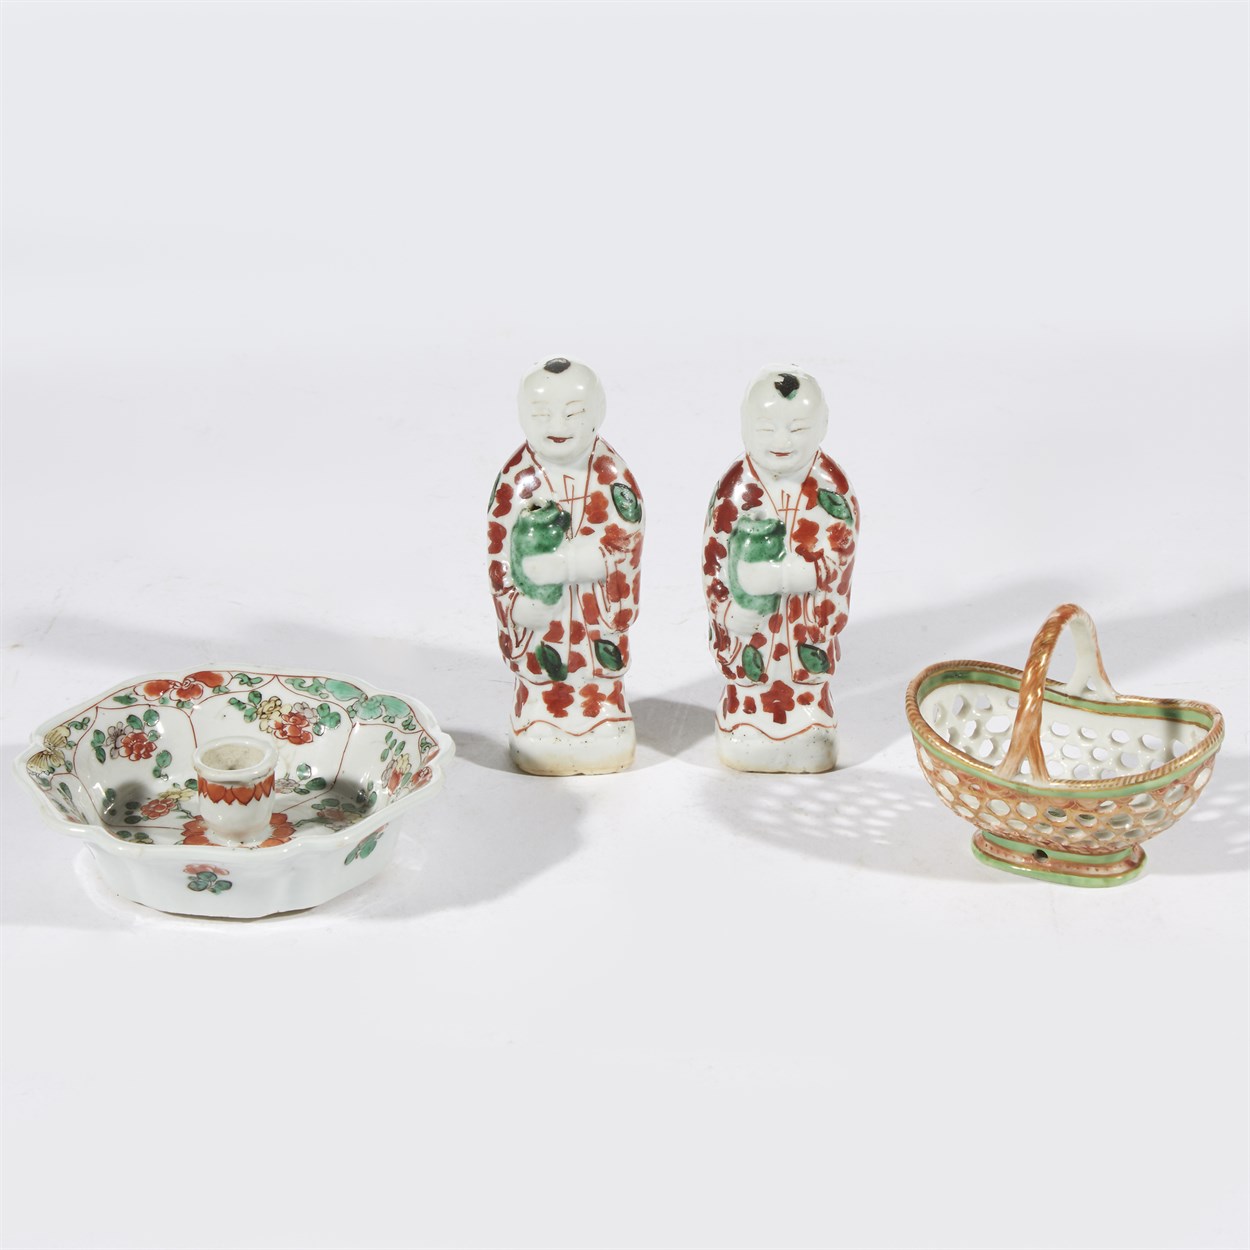 Lot 120 - A group of nine Chinese porcelain assorted tablewares